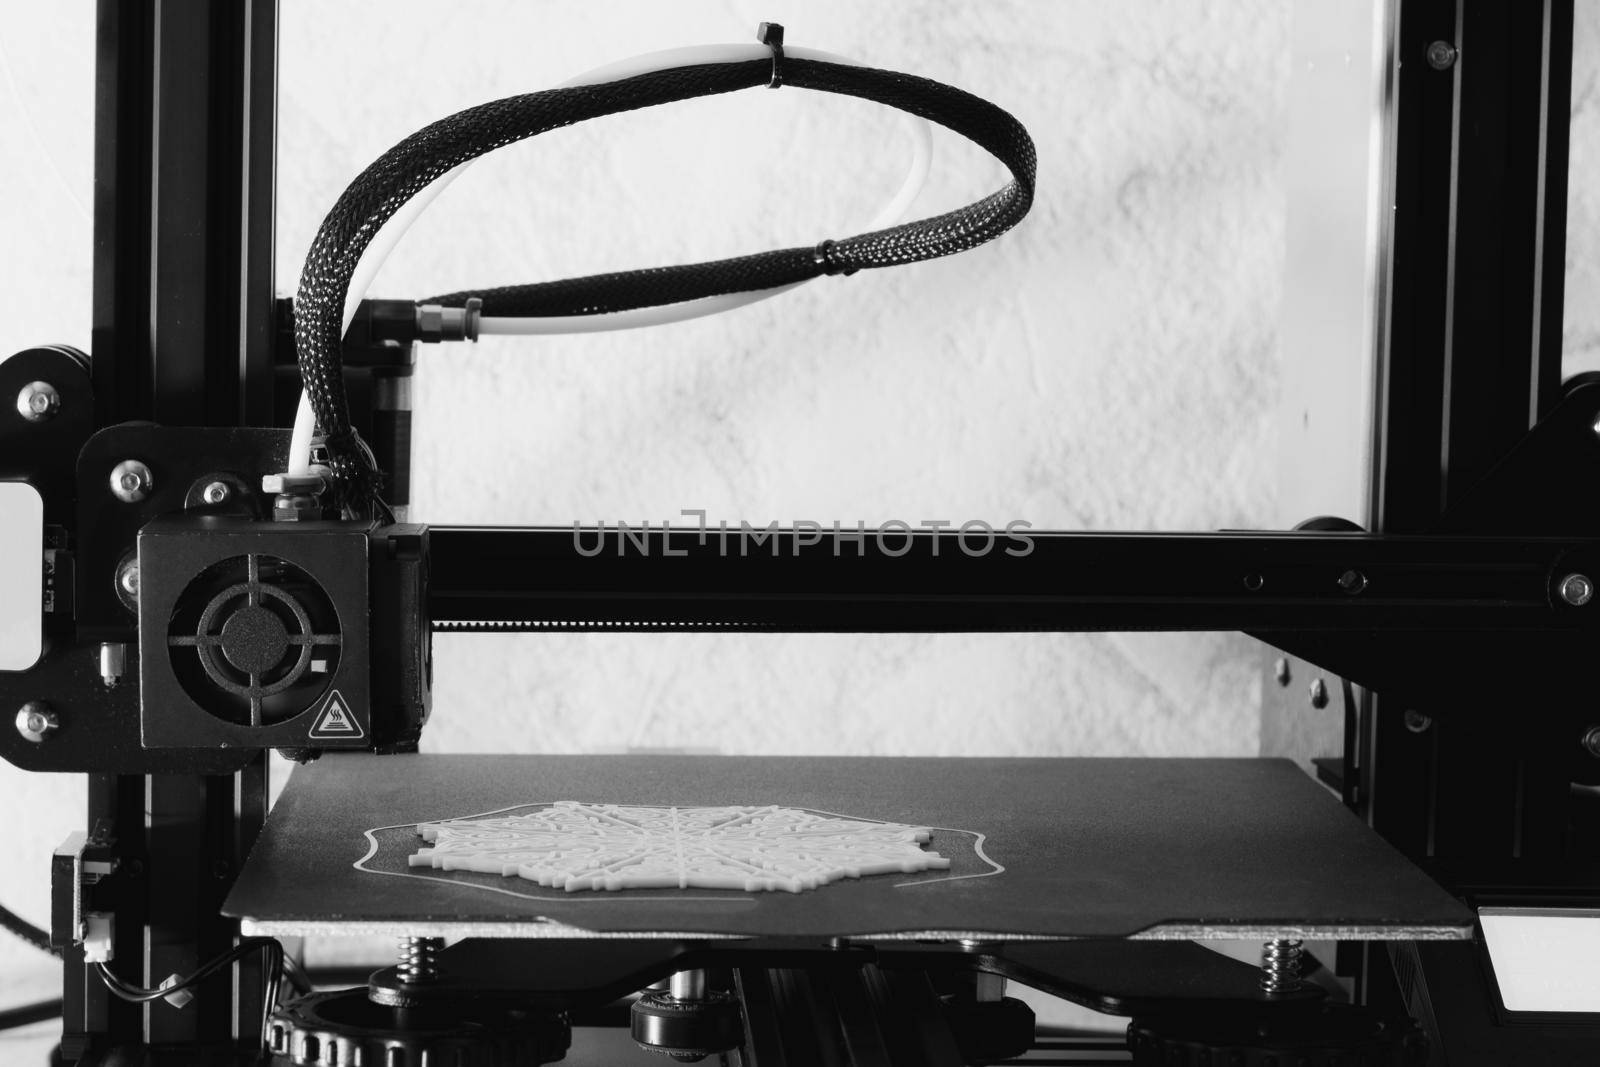 Snowflake printing on a 3D printer, 3D print details. Black and white image.